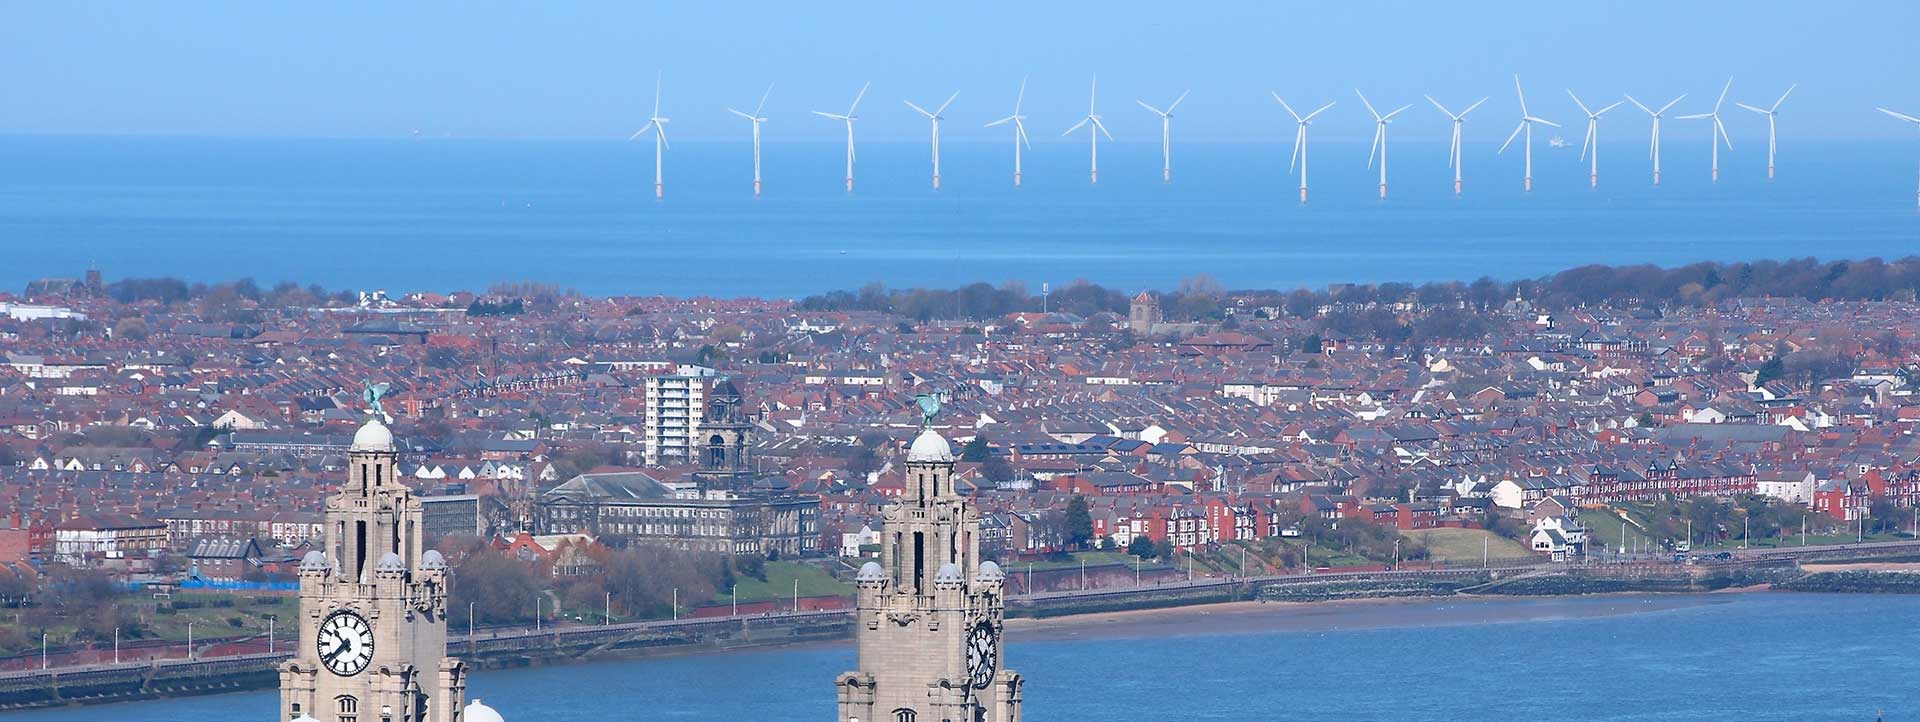 Liverpool and wind farms